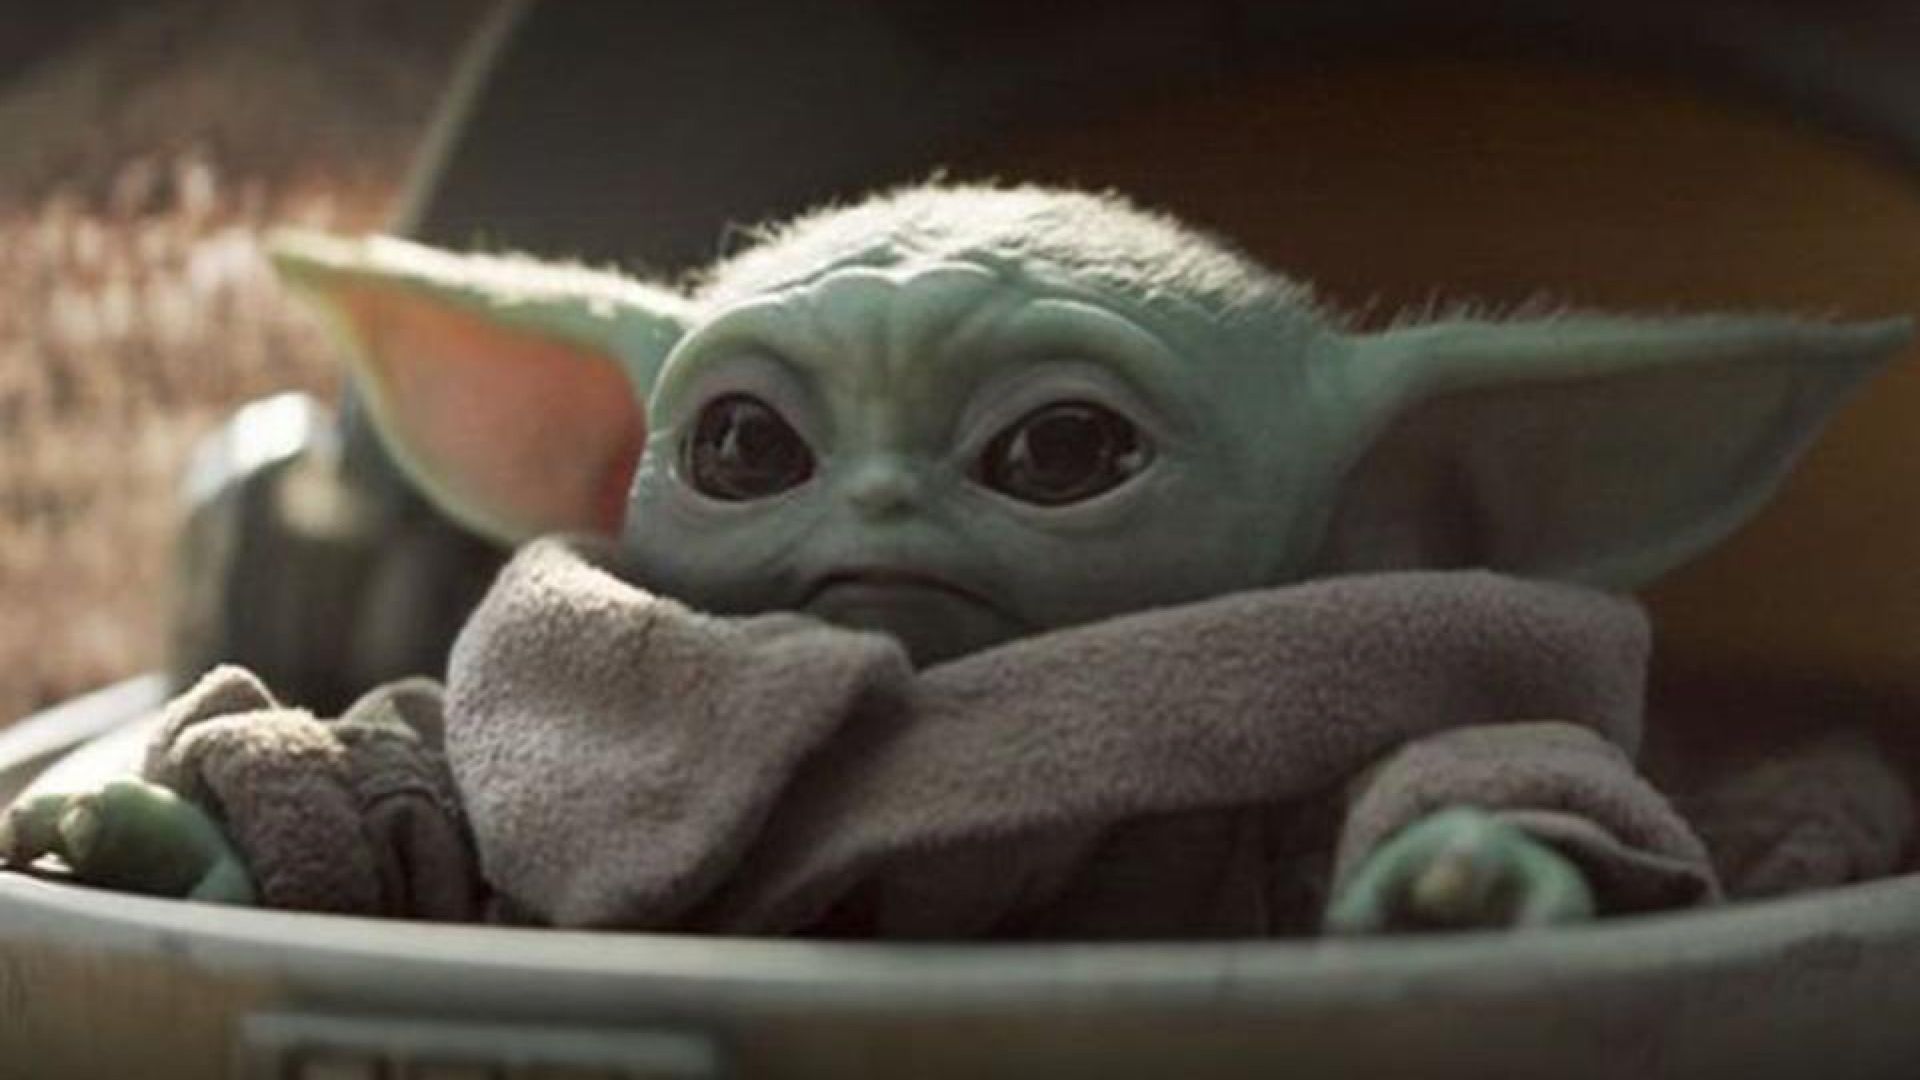 Free Download Baby Yoda Hd Wallpaper 19x1080 19x1080 For Your Desktop Mobile Tablet Explore 32 Baby Yoda Hd Wallpapers Baby Yoda Valentine Wallpapers Yoda Wallpaper Hd Hulk Yoda Wallpaper Hd